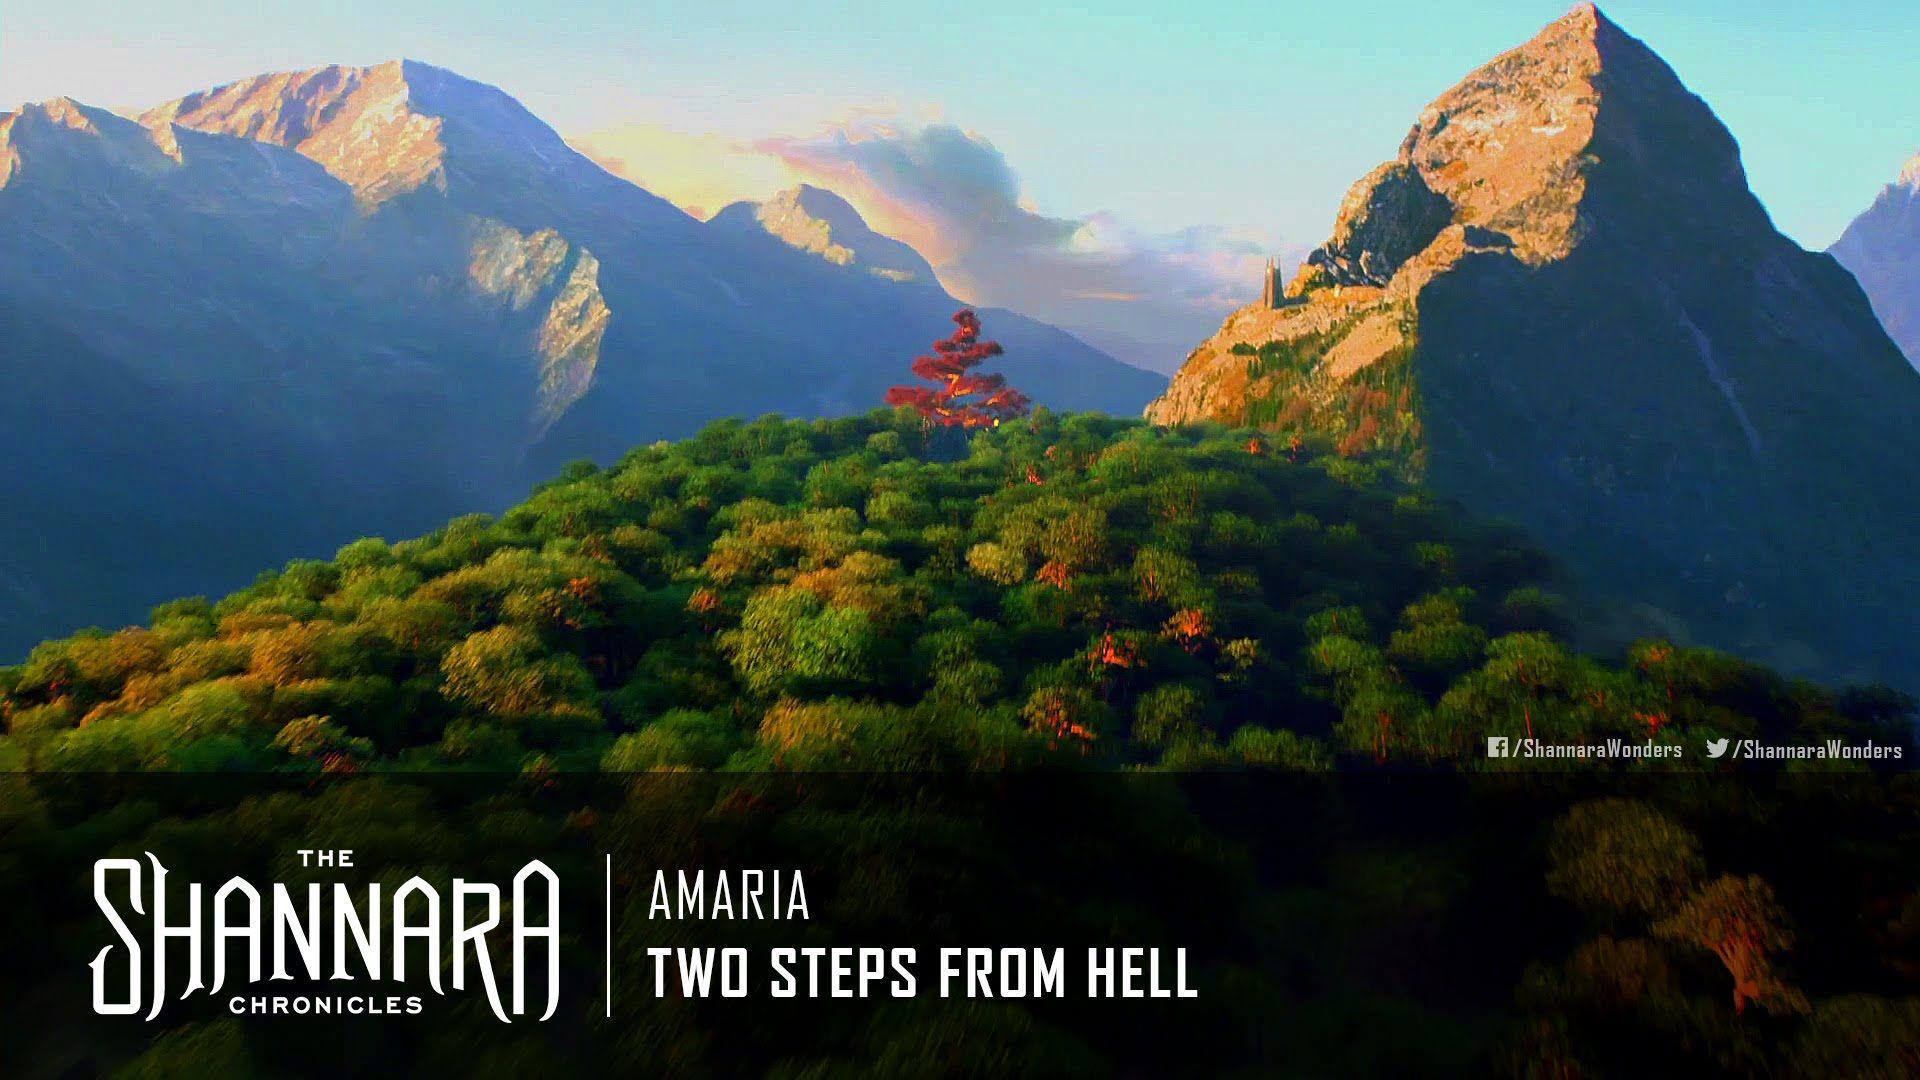 Two Steps From Hell. The Shannara Chronicles First Look